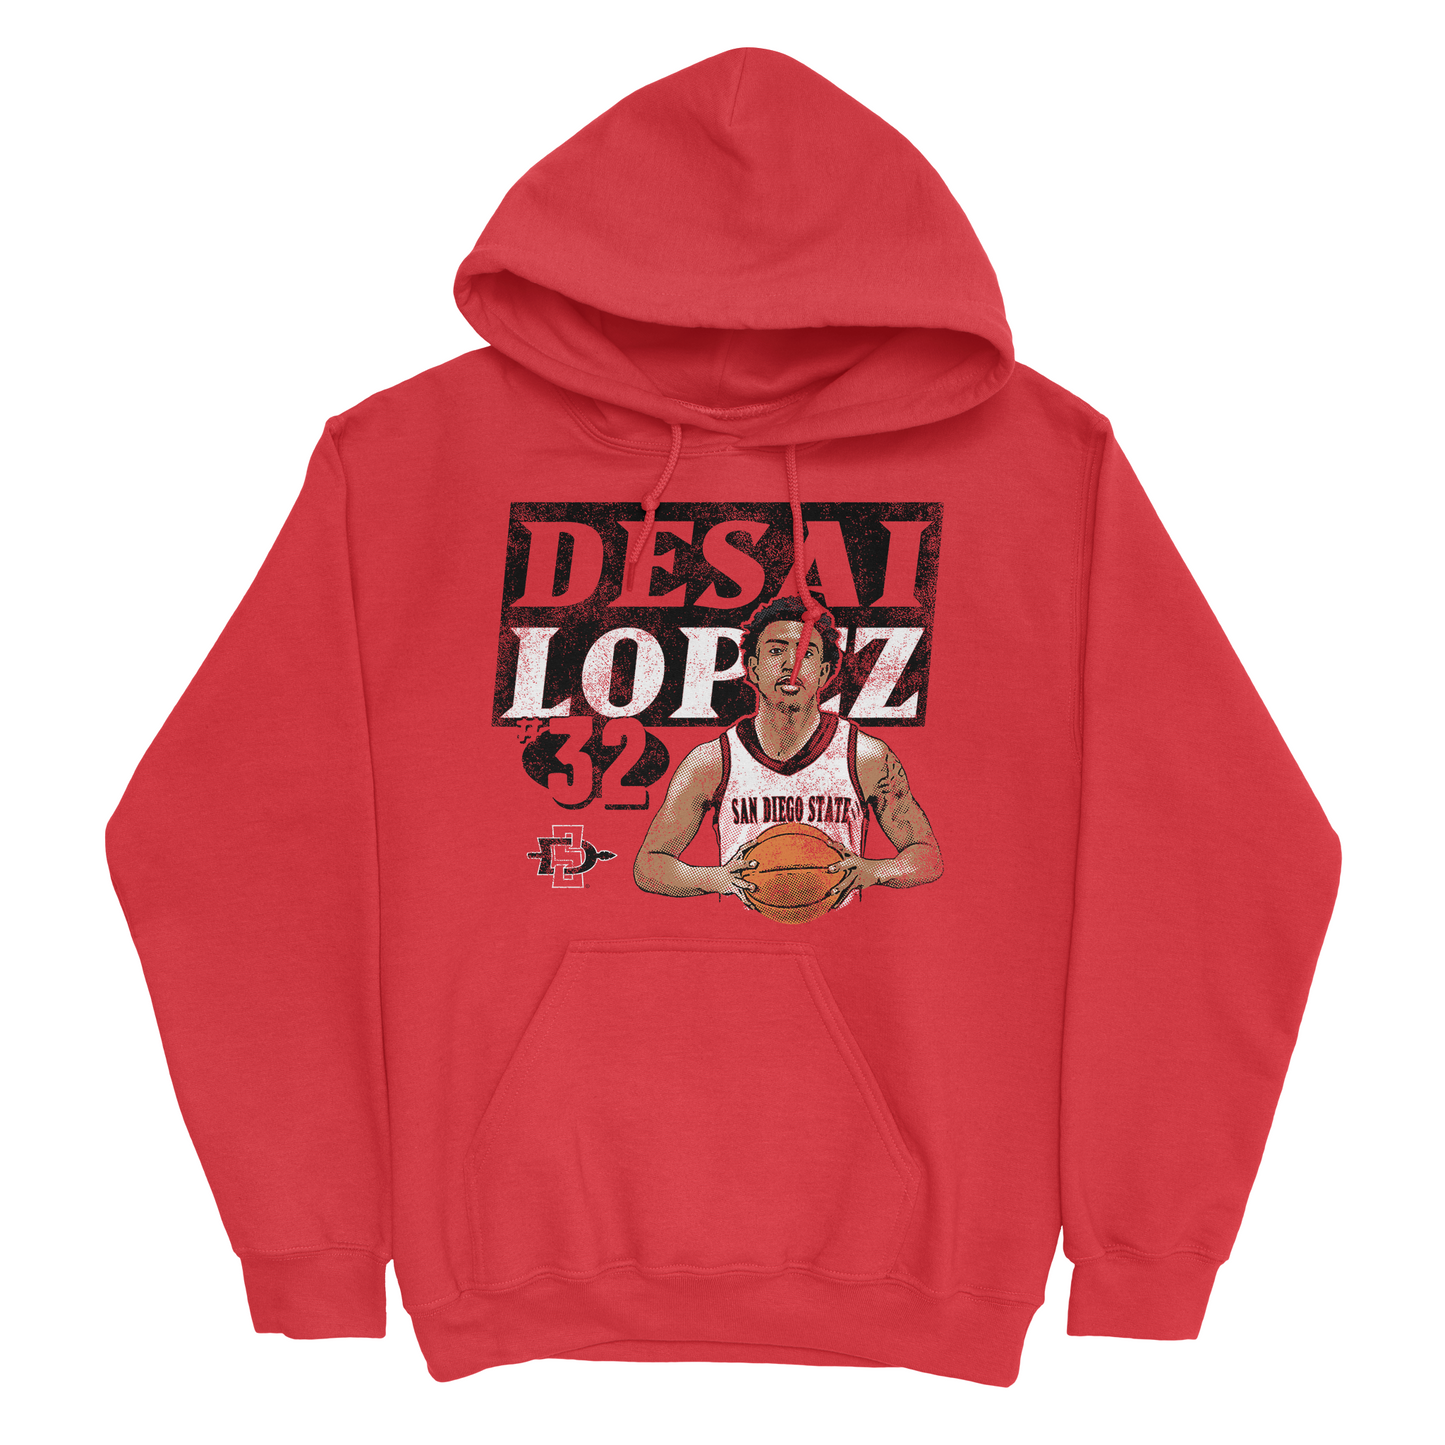 EXCLUSIVE RELEASE: Desai Lopez Hoodie in Red